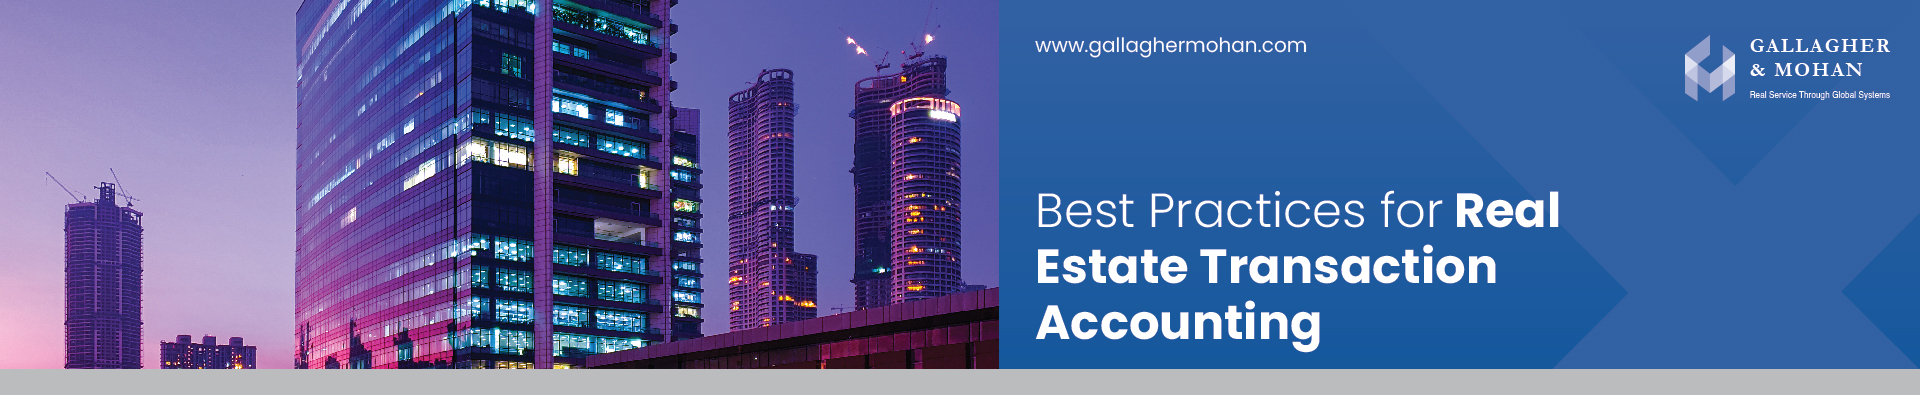 Best Practices For Real Estate Transaction Accounting